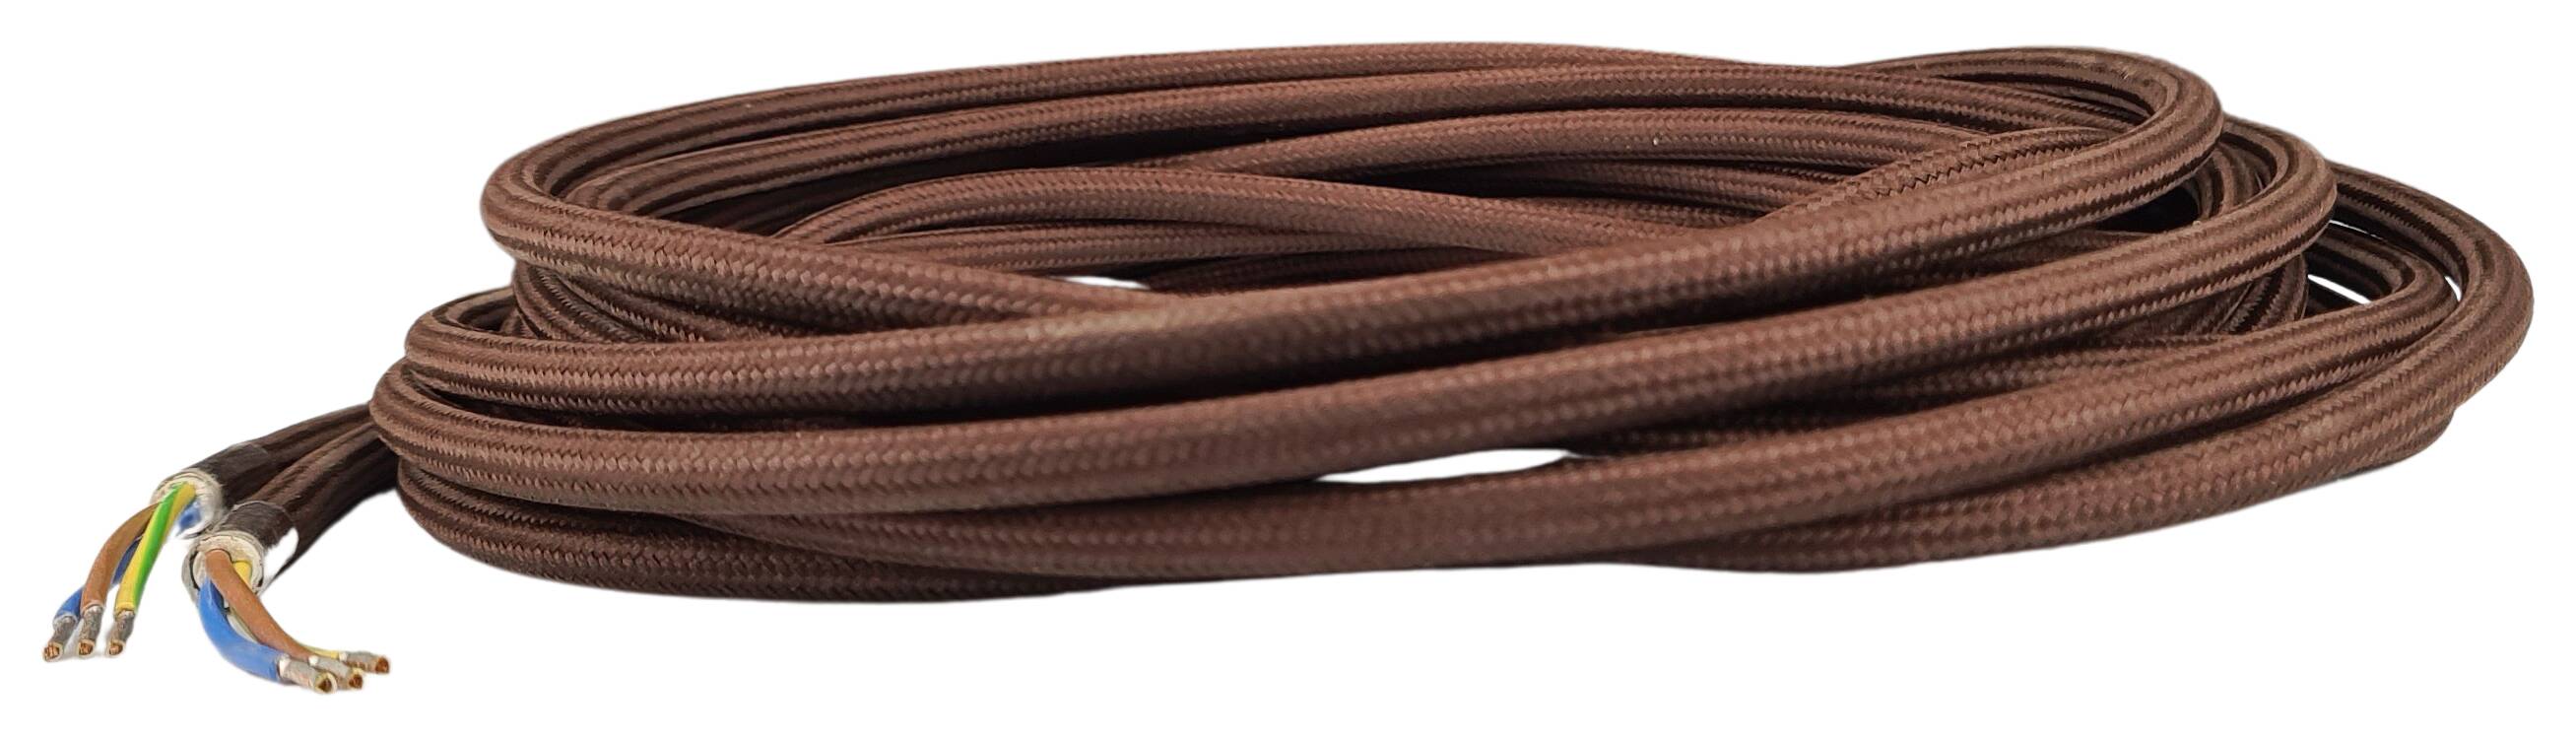 cable section 3G 0,75 H03VV-F textile braided 2500 mm 60/50 end sleeve color 285 brown